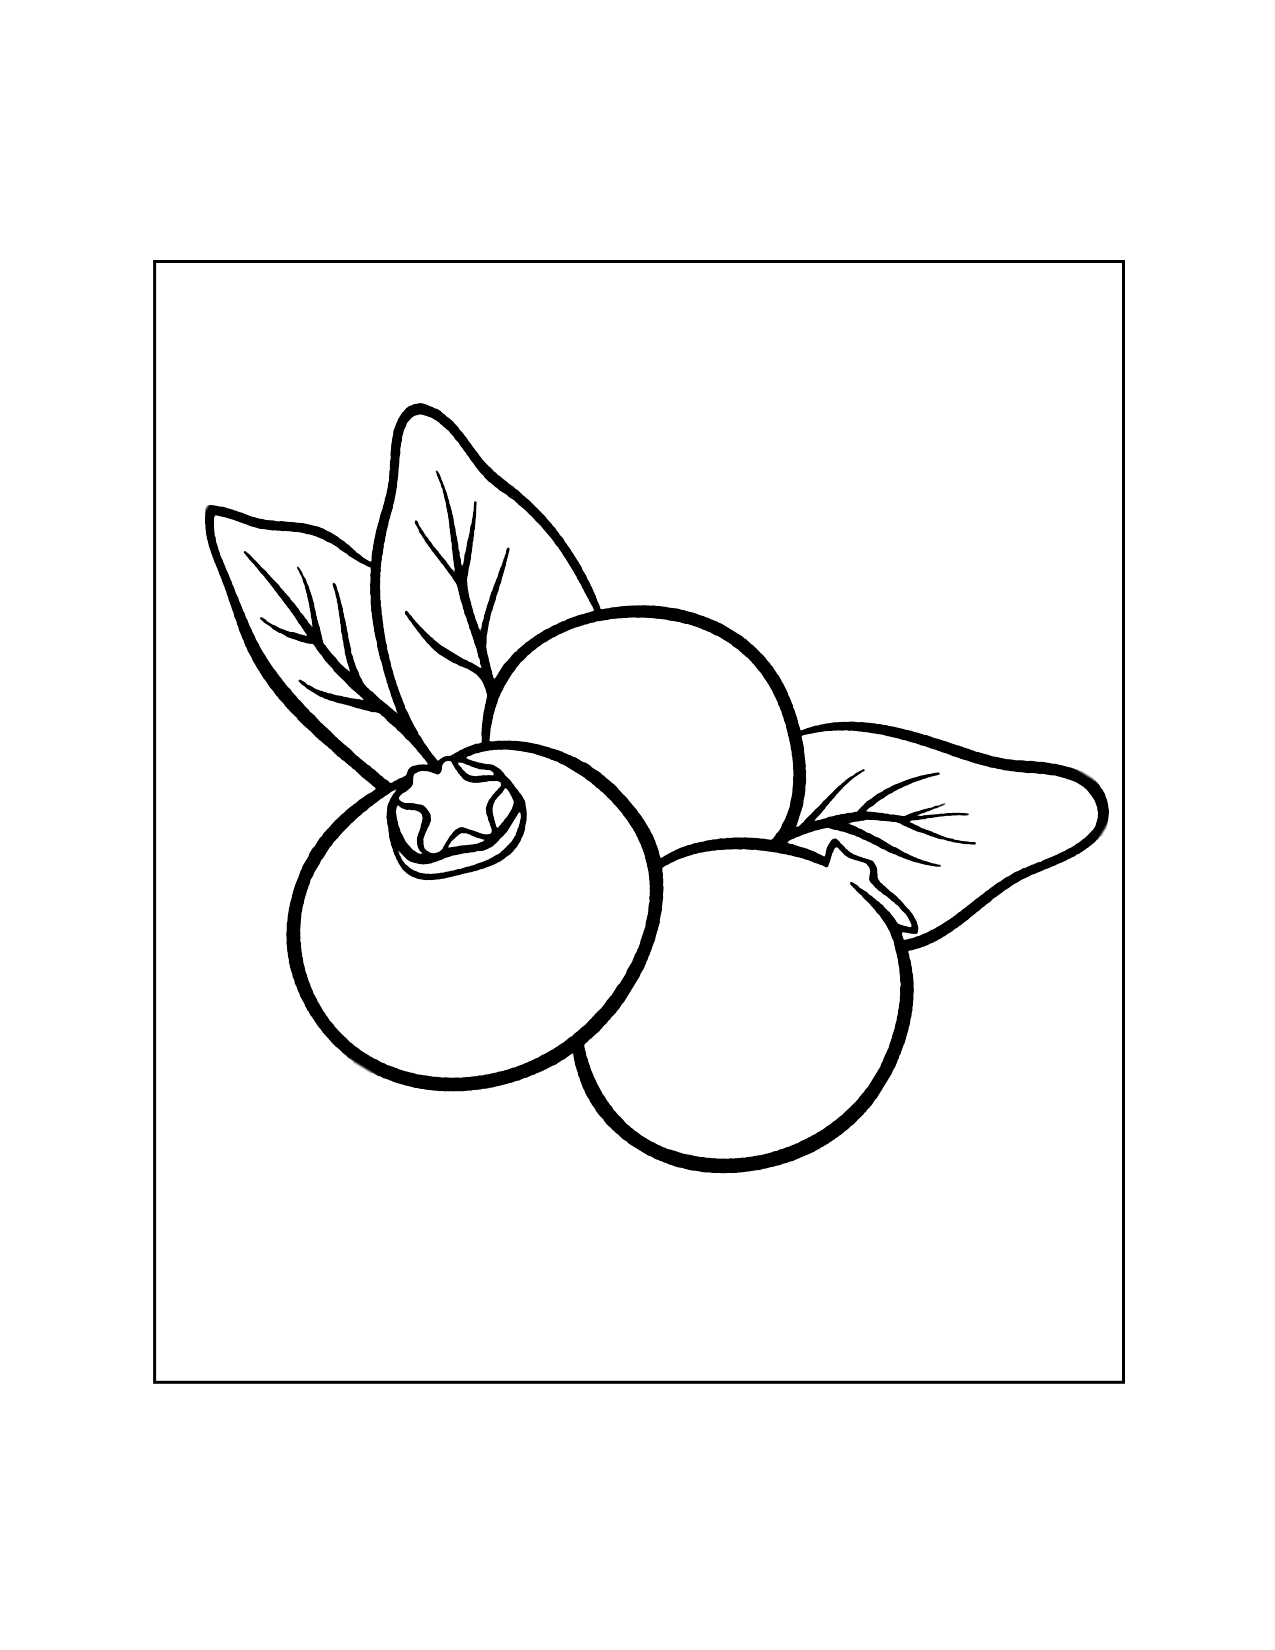 Easy Blueberries Coloring Page